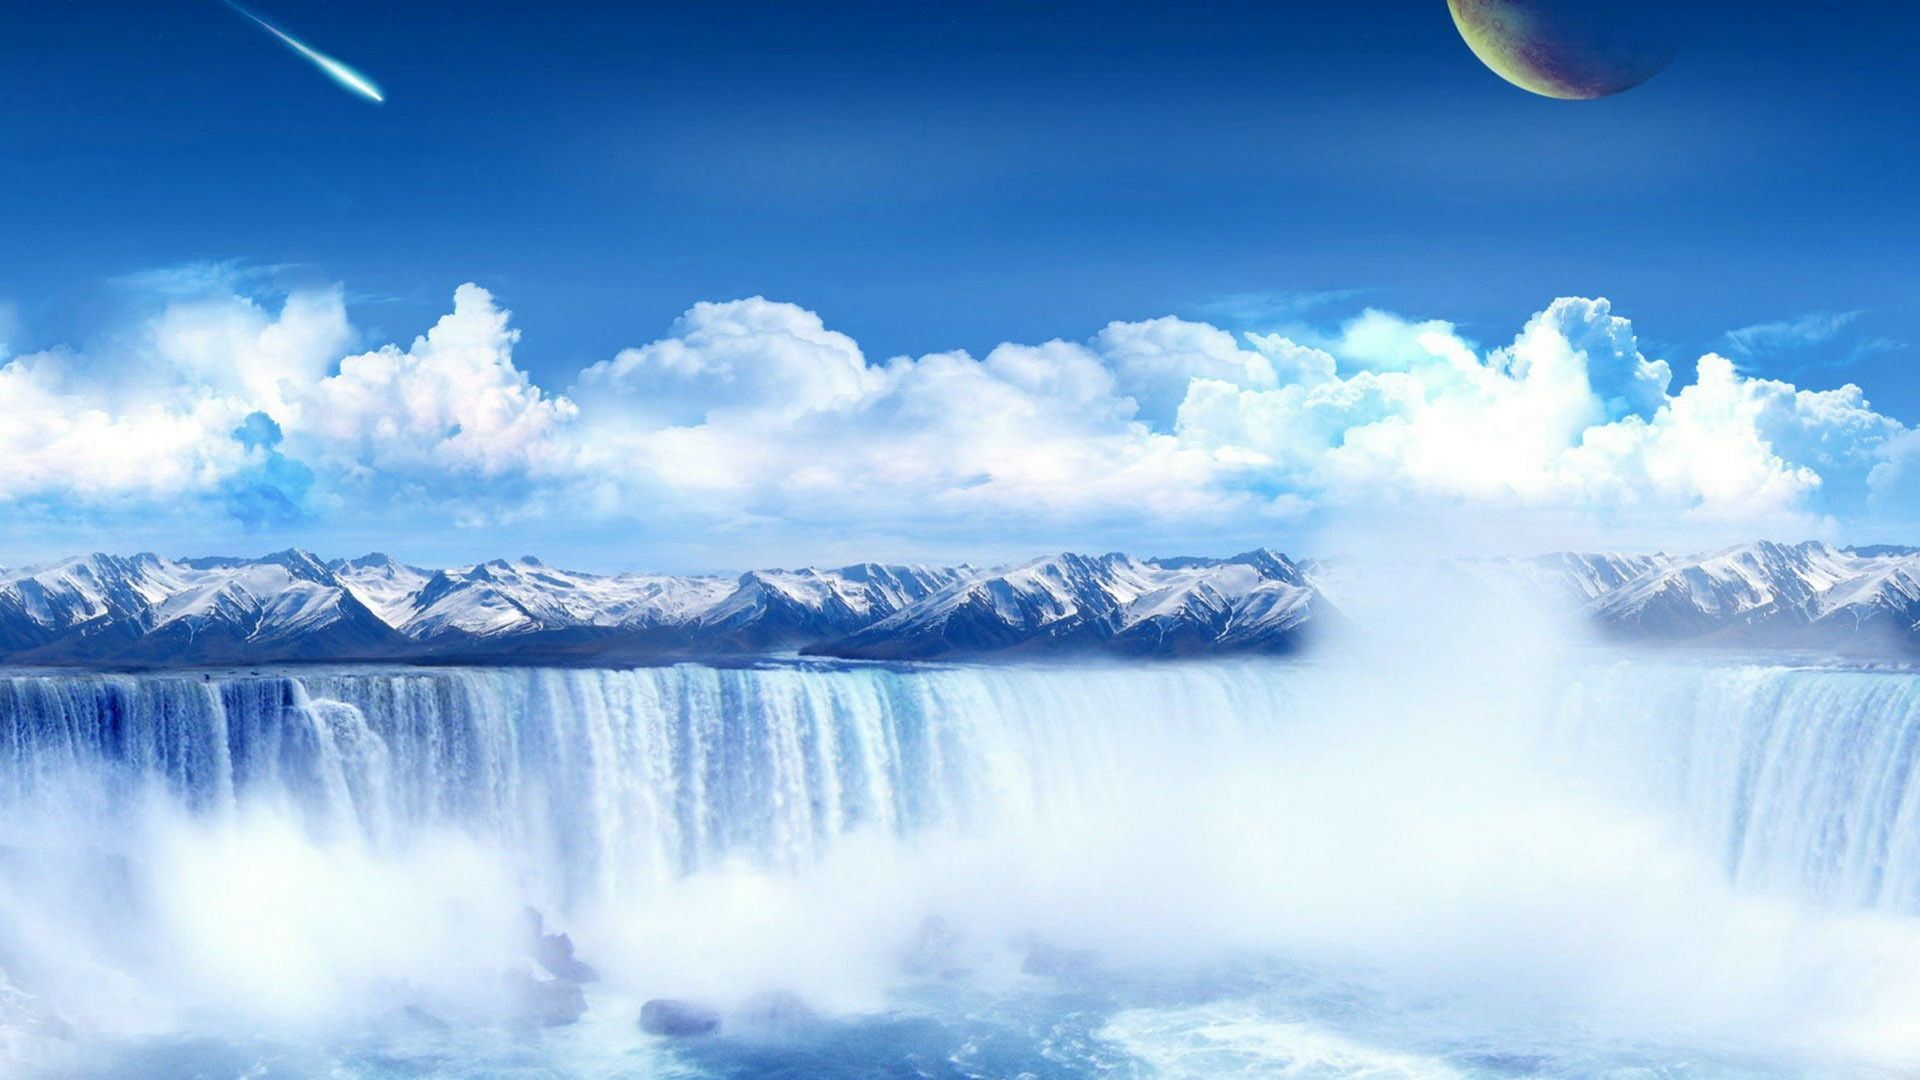 Hd 1920x1080 Cool Waterfall And Planet Desktop Wallpapers Backgrounds